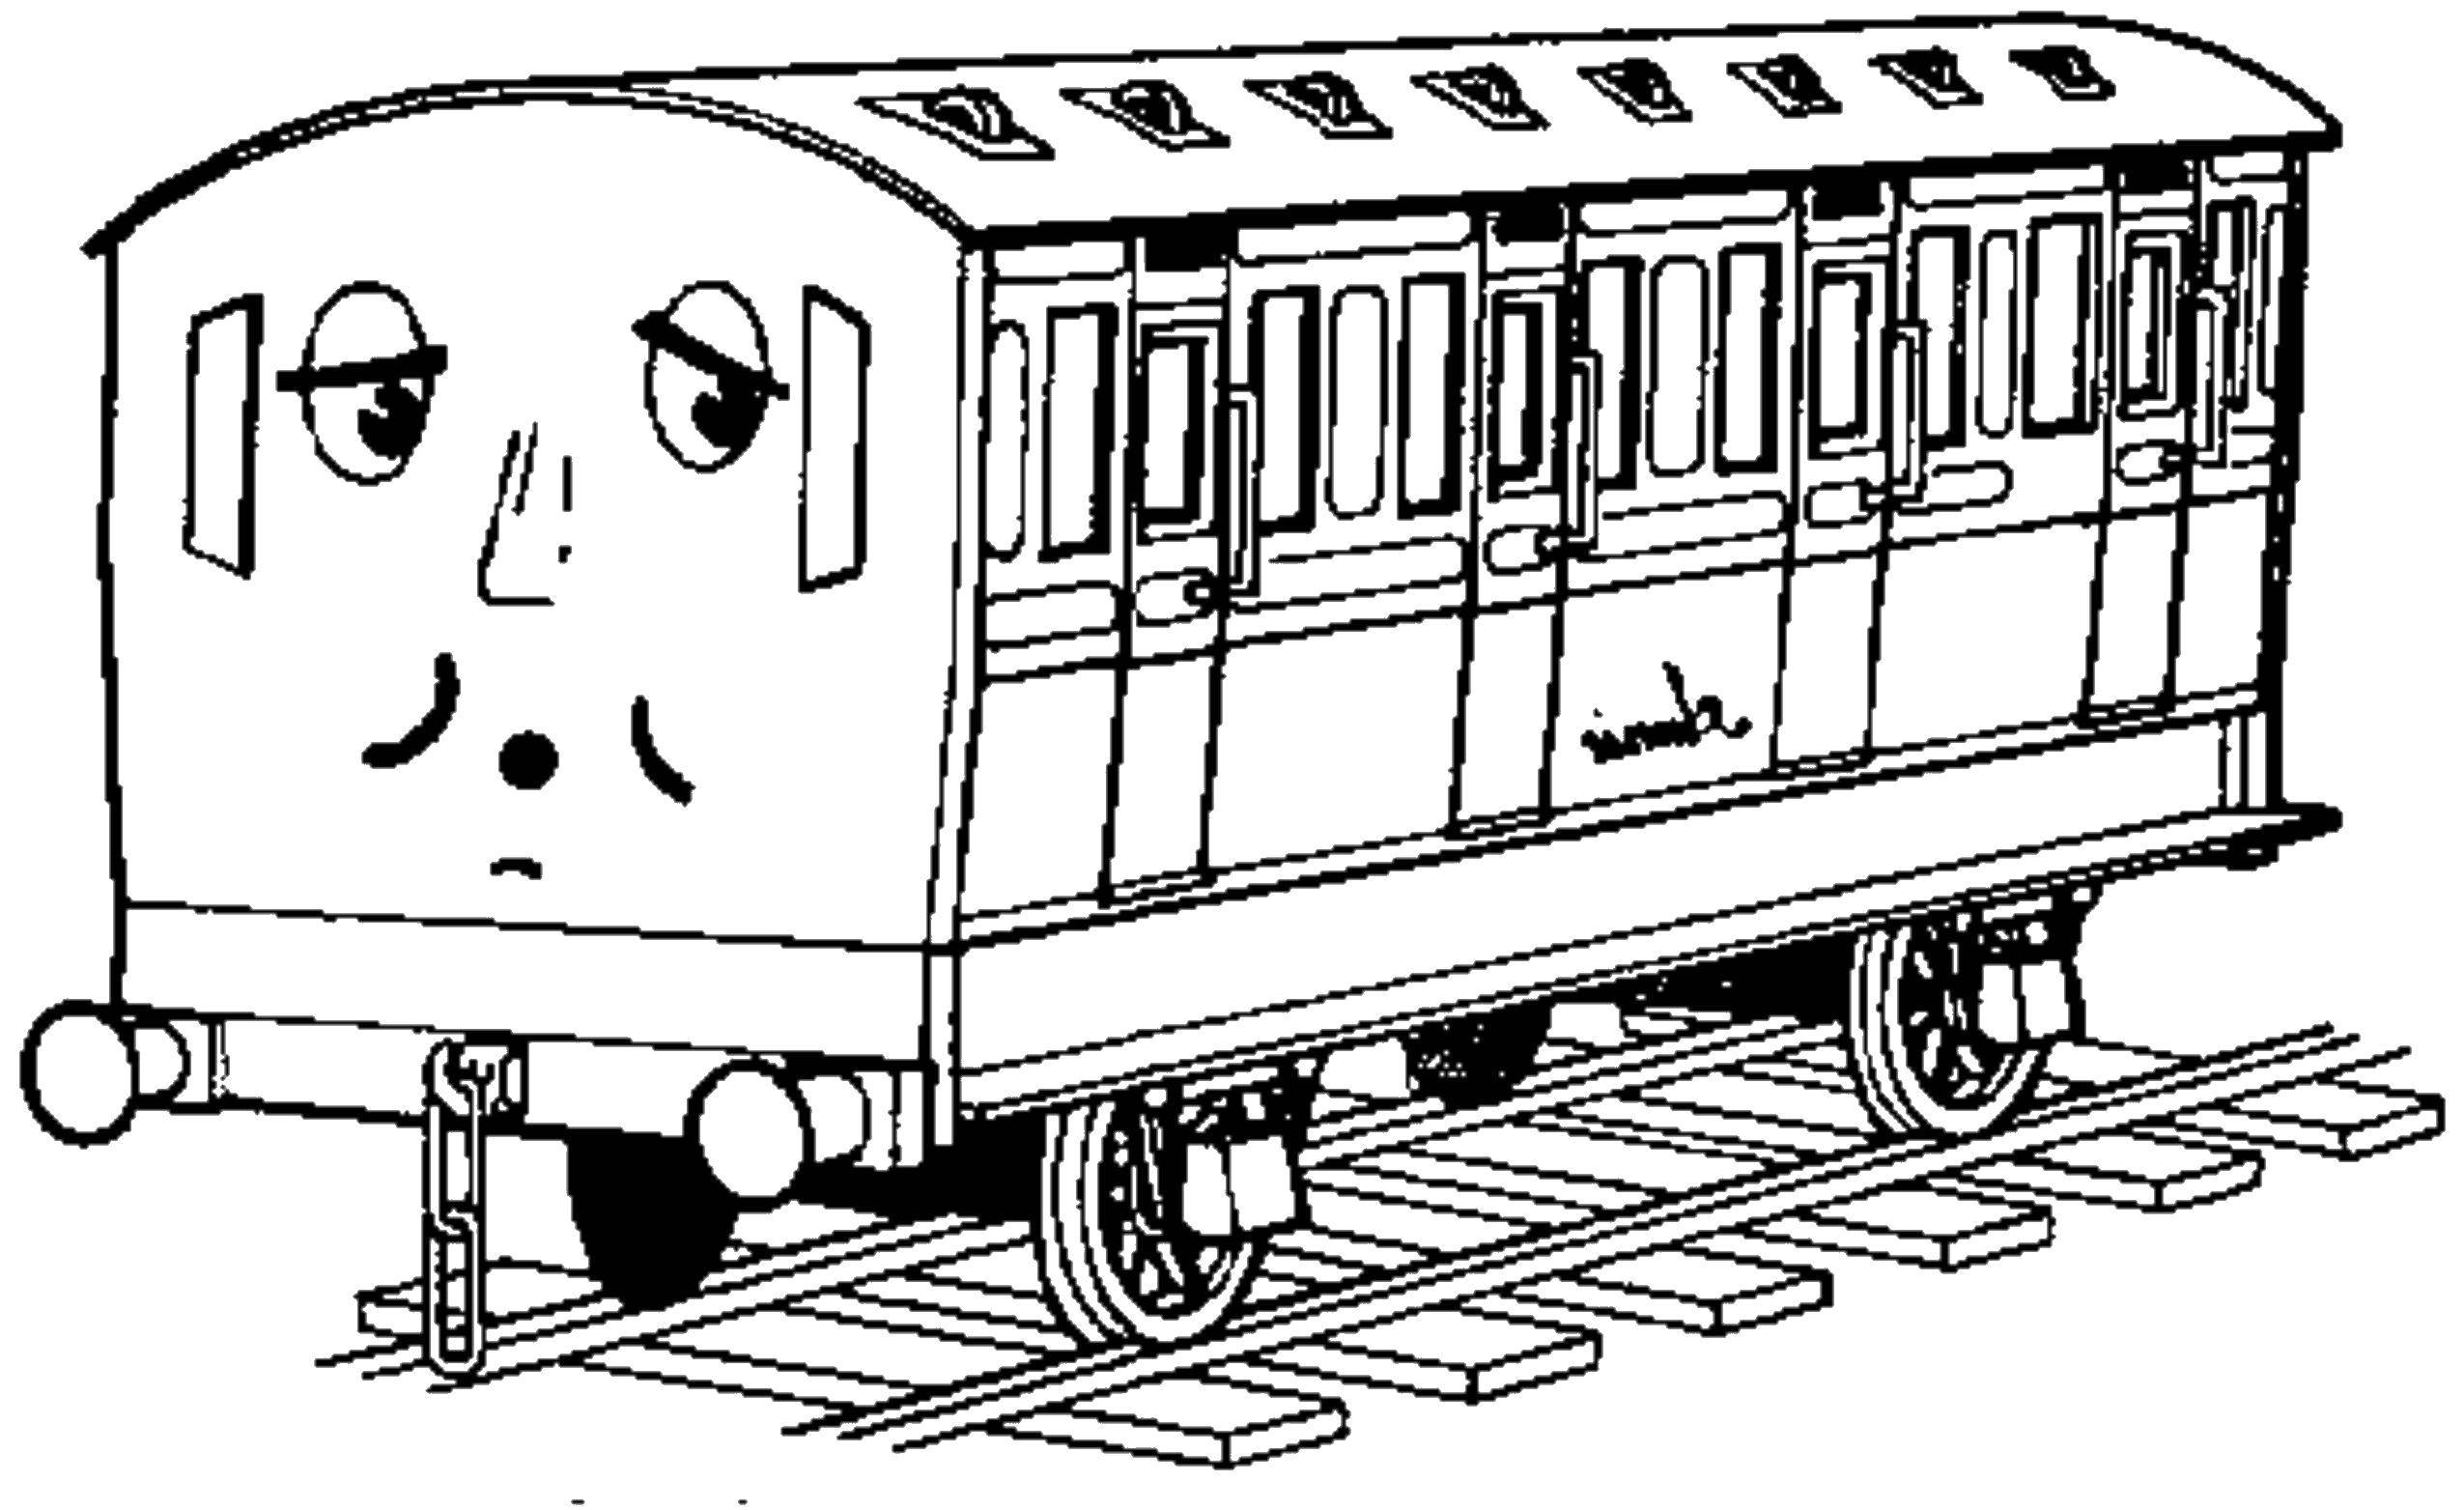 Coloring The car. Category train. Tags:  trains, cars.